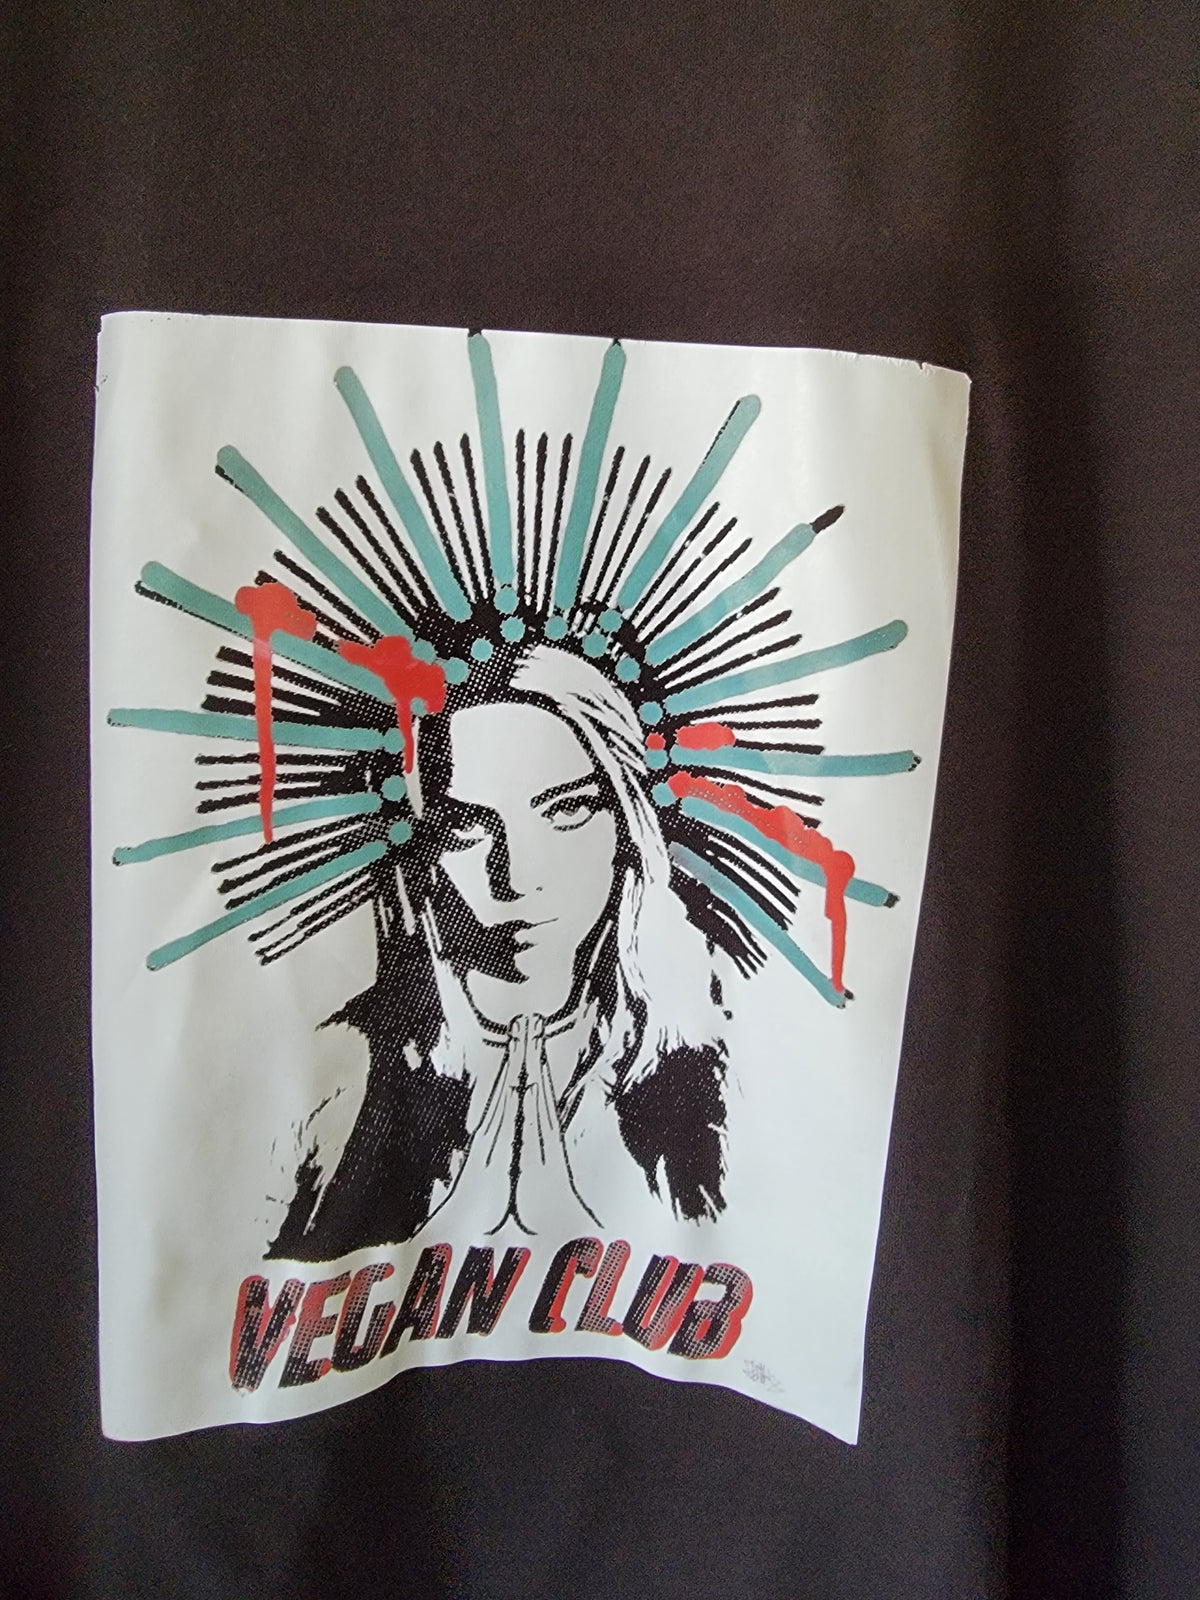 SOLD OUT - Billie Eilish Halo praying Vegan Club T-shirt with large full front design in color collab with @_ebik_fgs_fh_